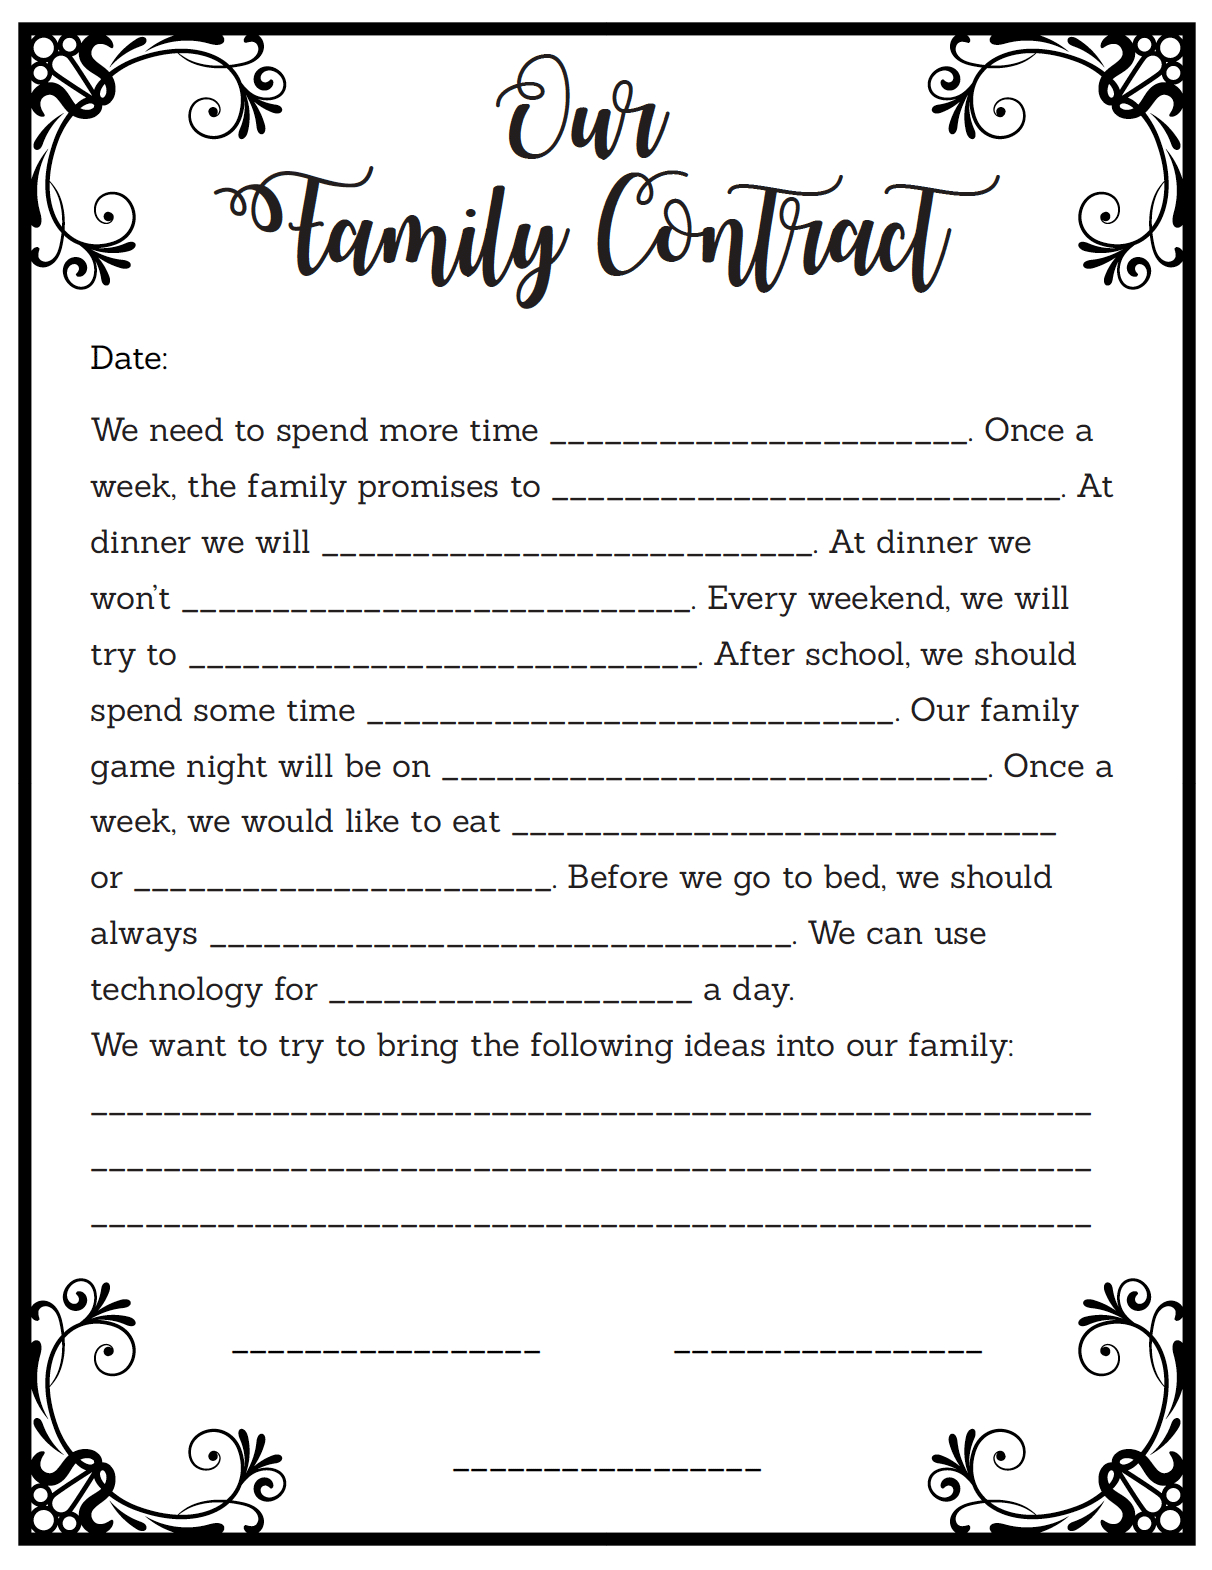 Family Contract Free Printable: Fill In The Blank Contract For Kids - Free Printable Contracts